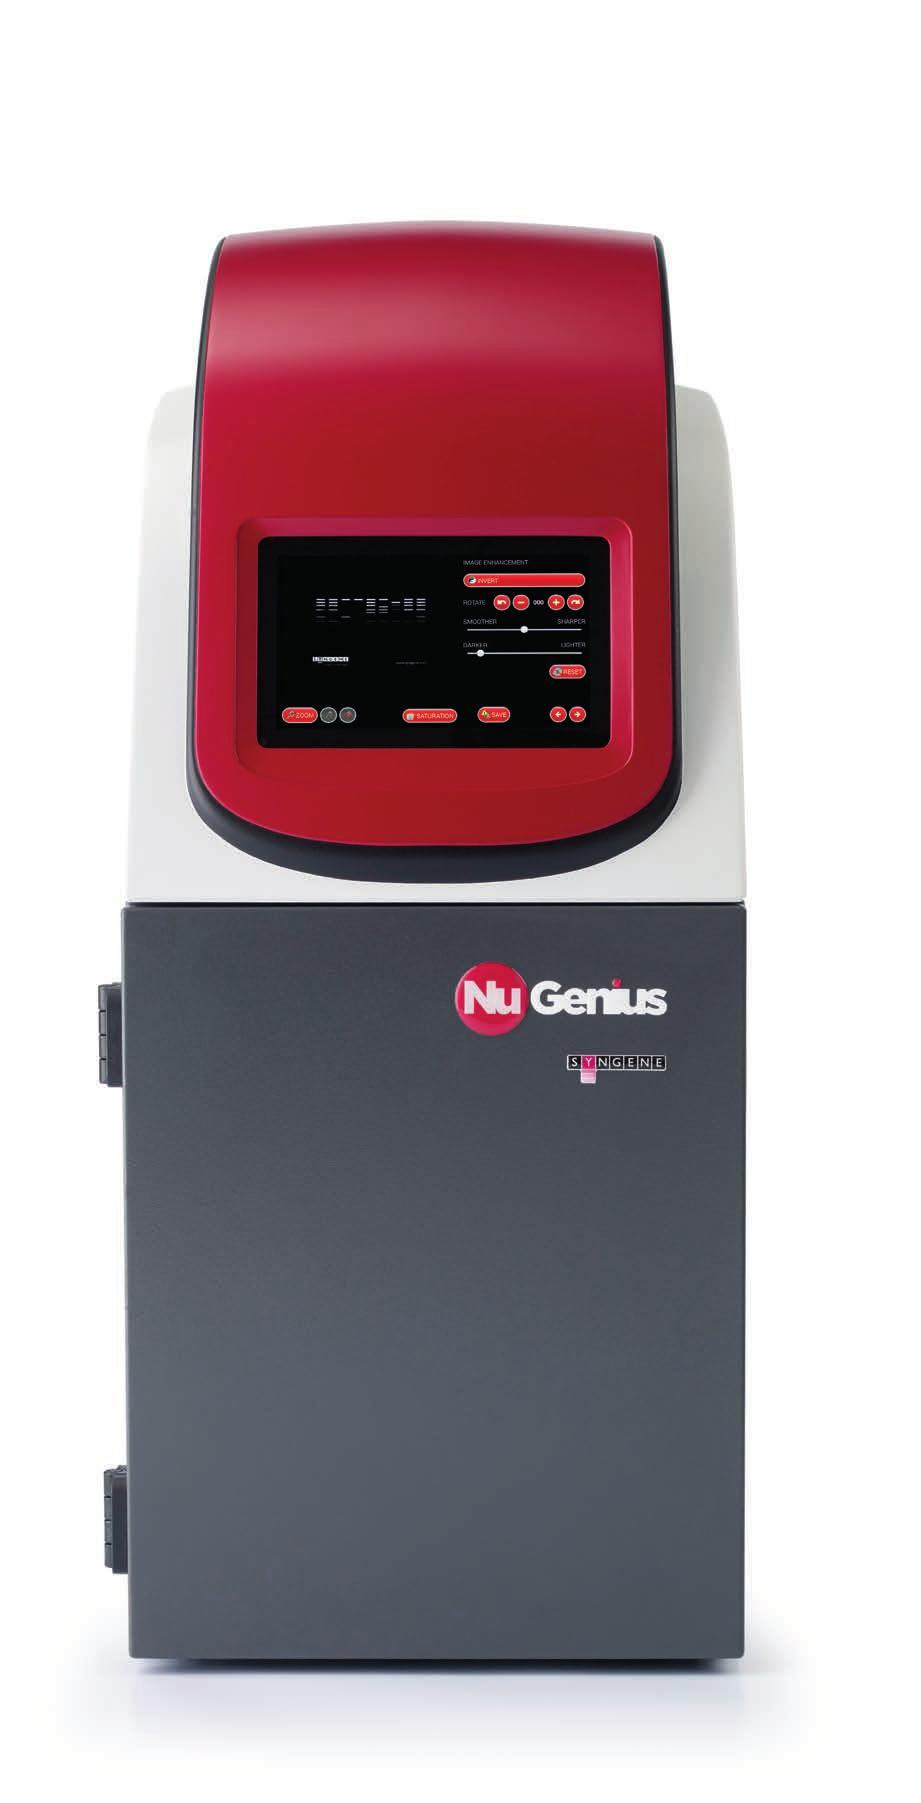 NUGENIUS NuGenius is a new generation, low cost, integrated system for DNA and protein analysis and gel documentation.